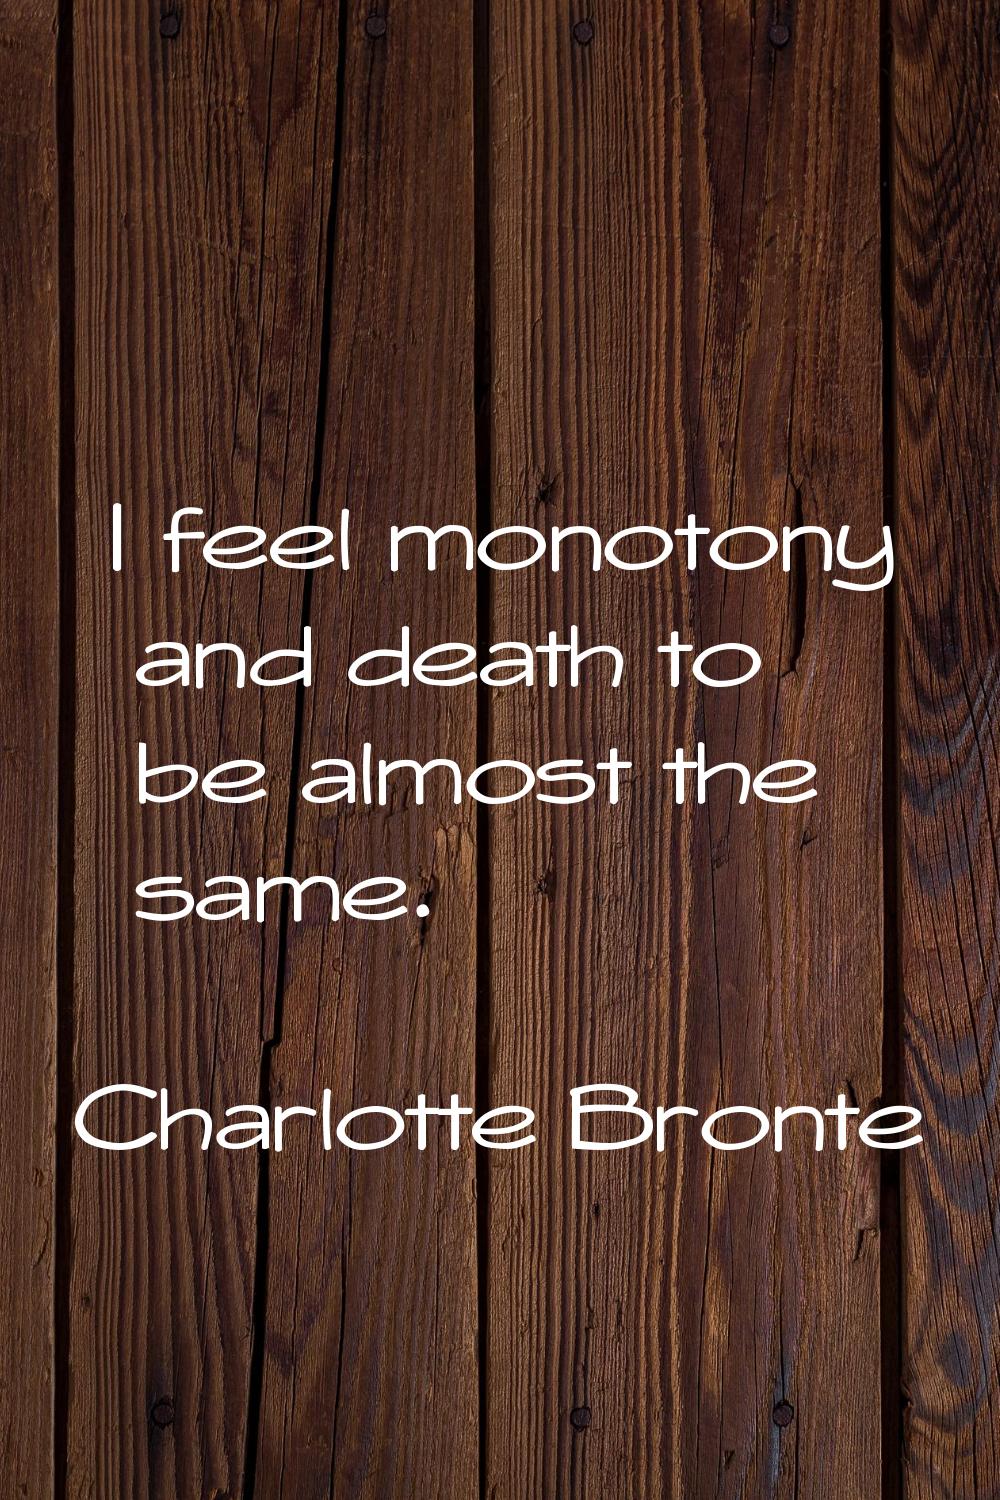 I feel monotony and death to be almost the same.